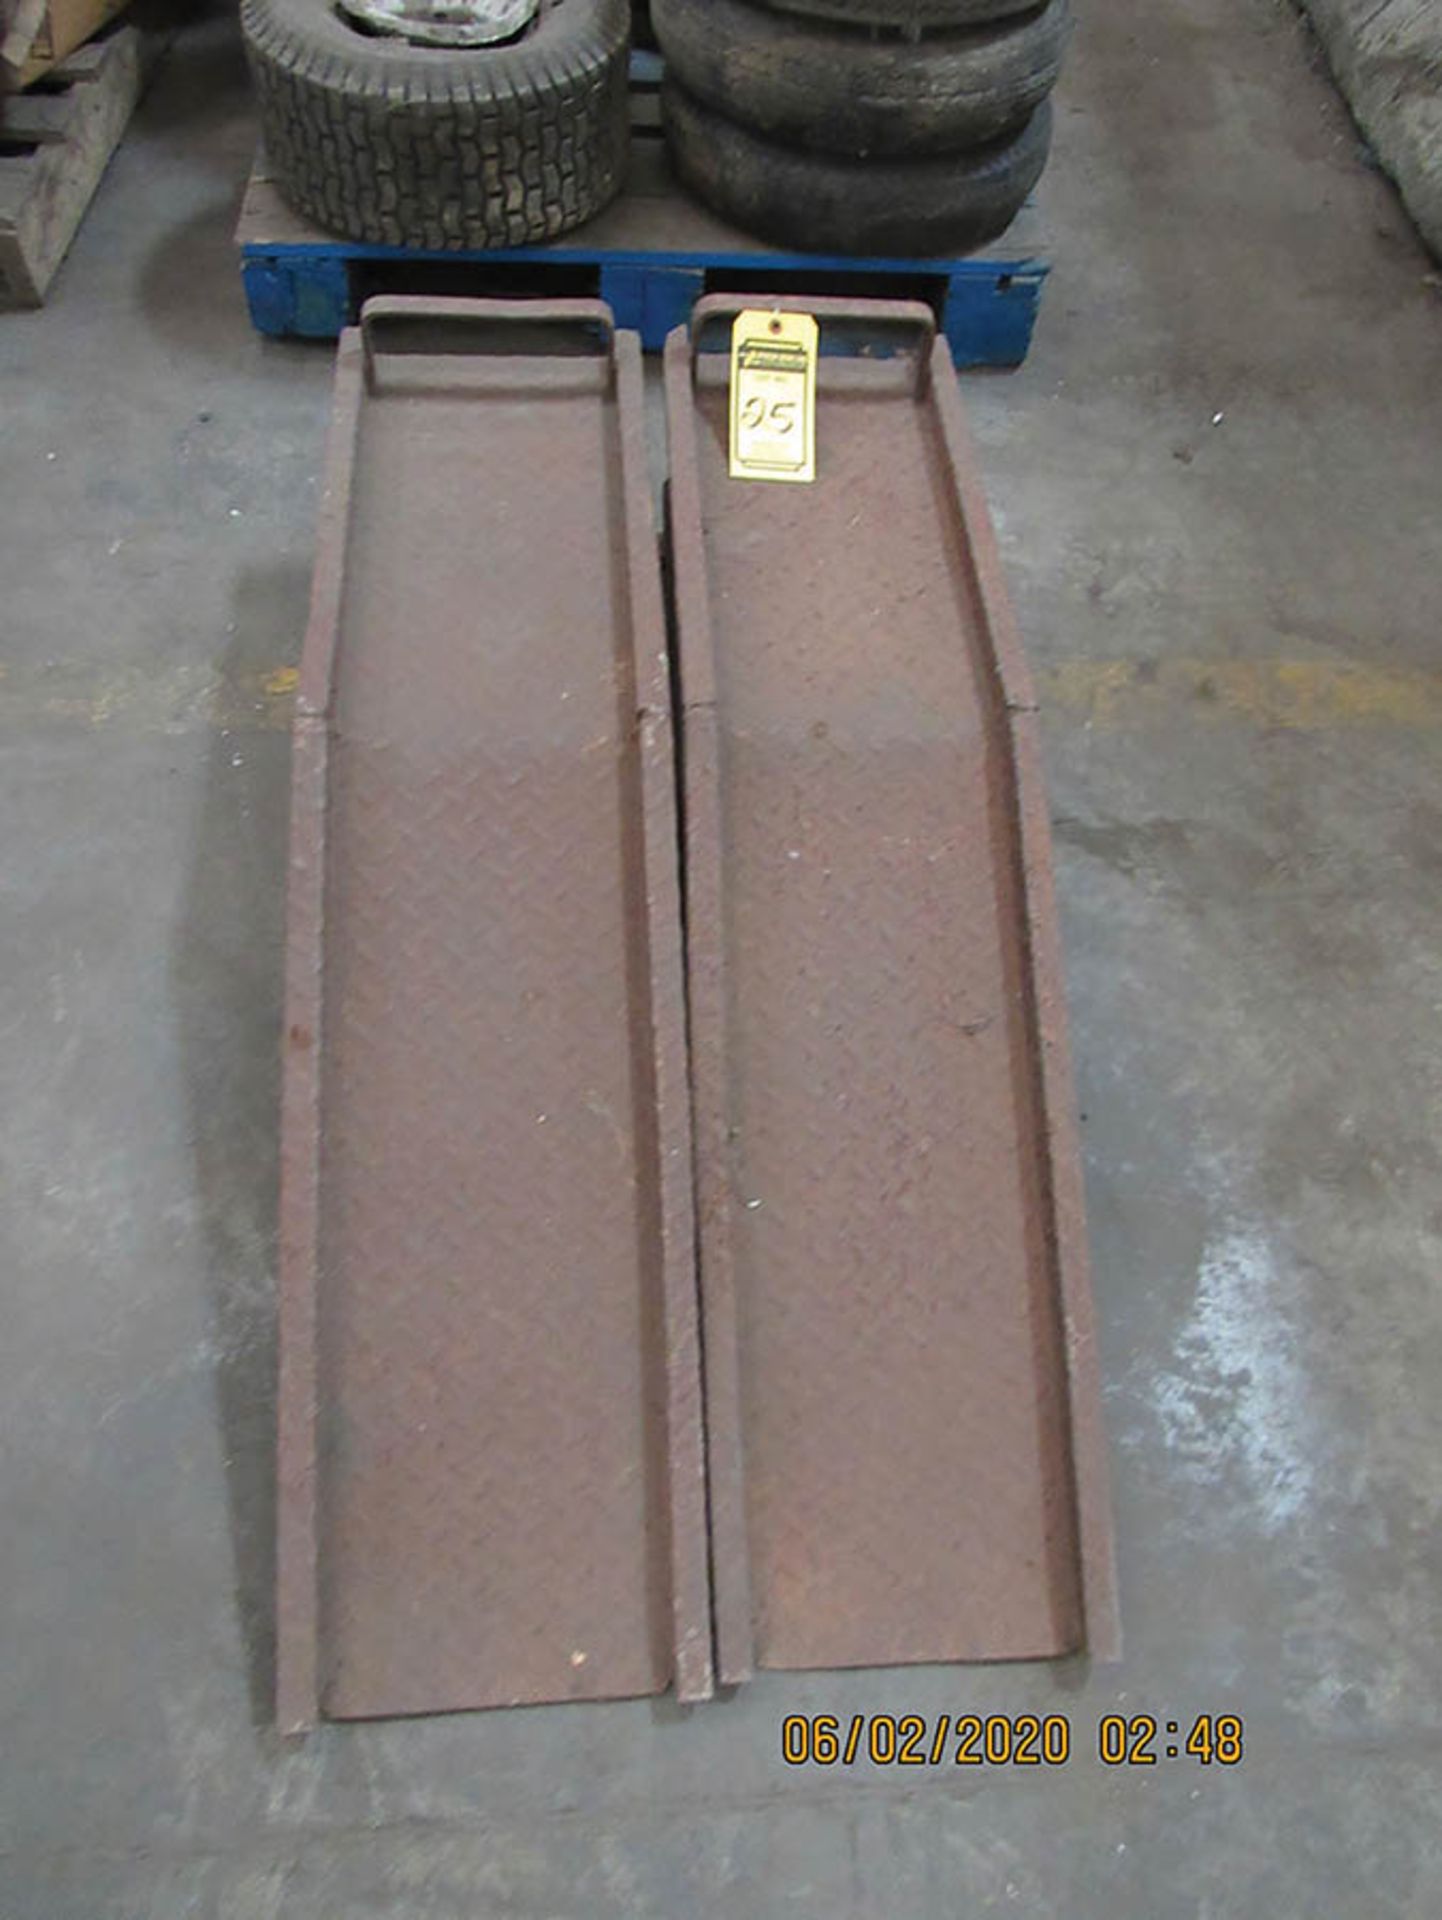 CAR RAMPS, ASSORTED LAWN MOWER TIRES W/ WHEELS 13 X 5 X 6 - 20 X 8 X 8 - 4.80 X 12 - Image 2 of 6